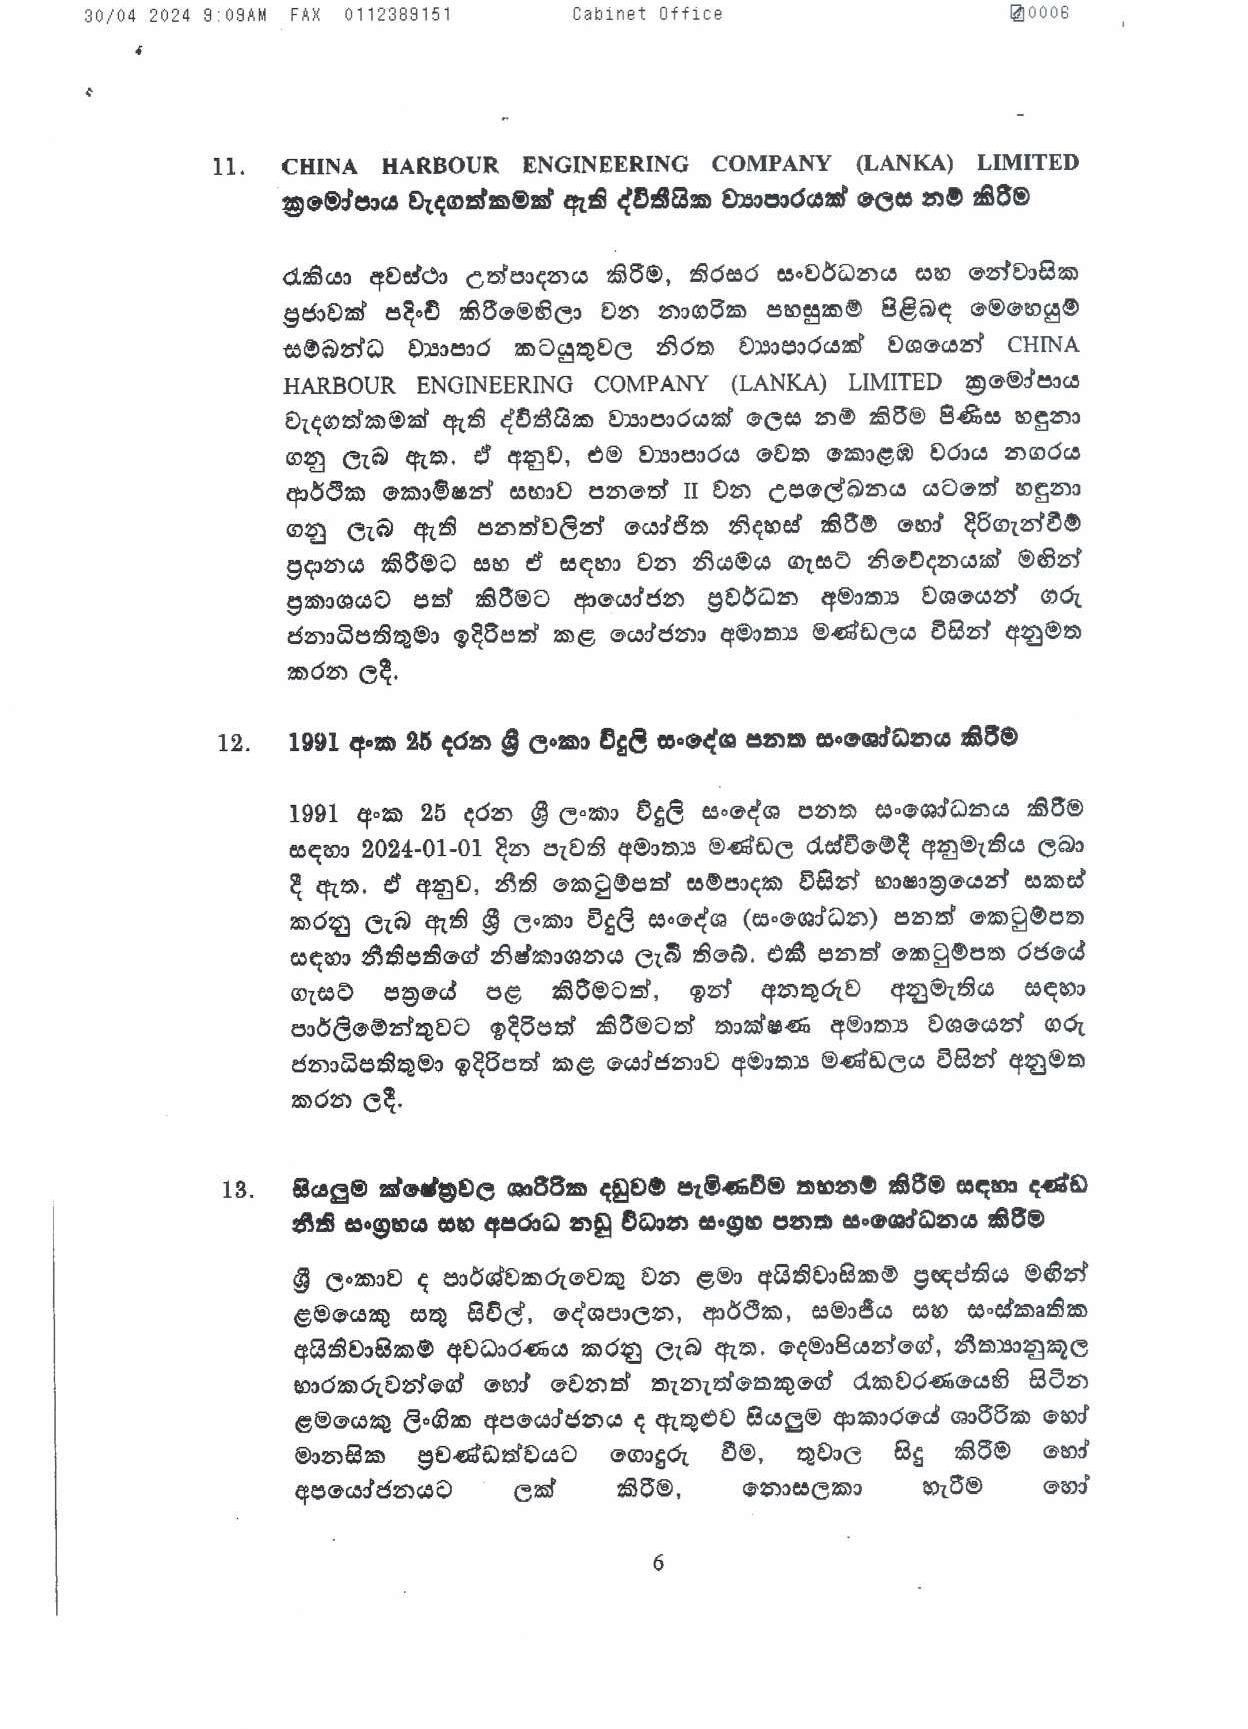 Cabinet Decision on 29.04.2024 page 006